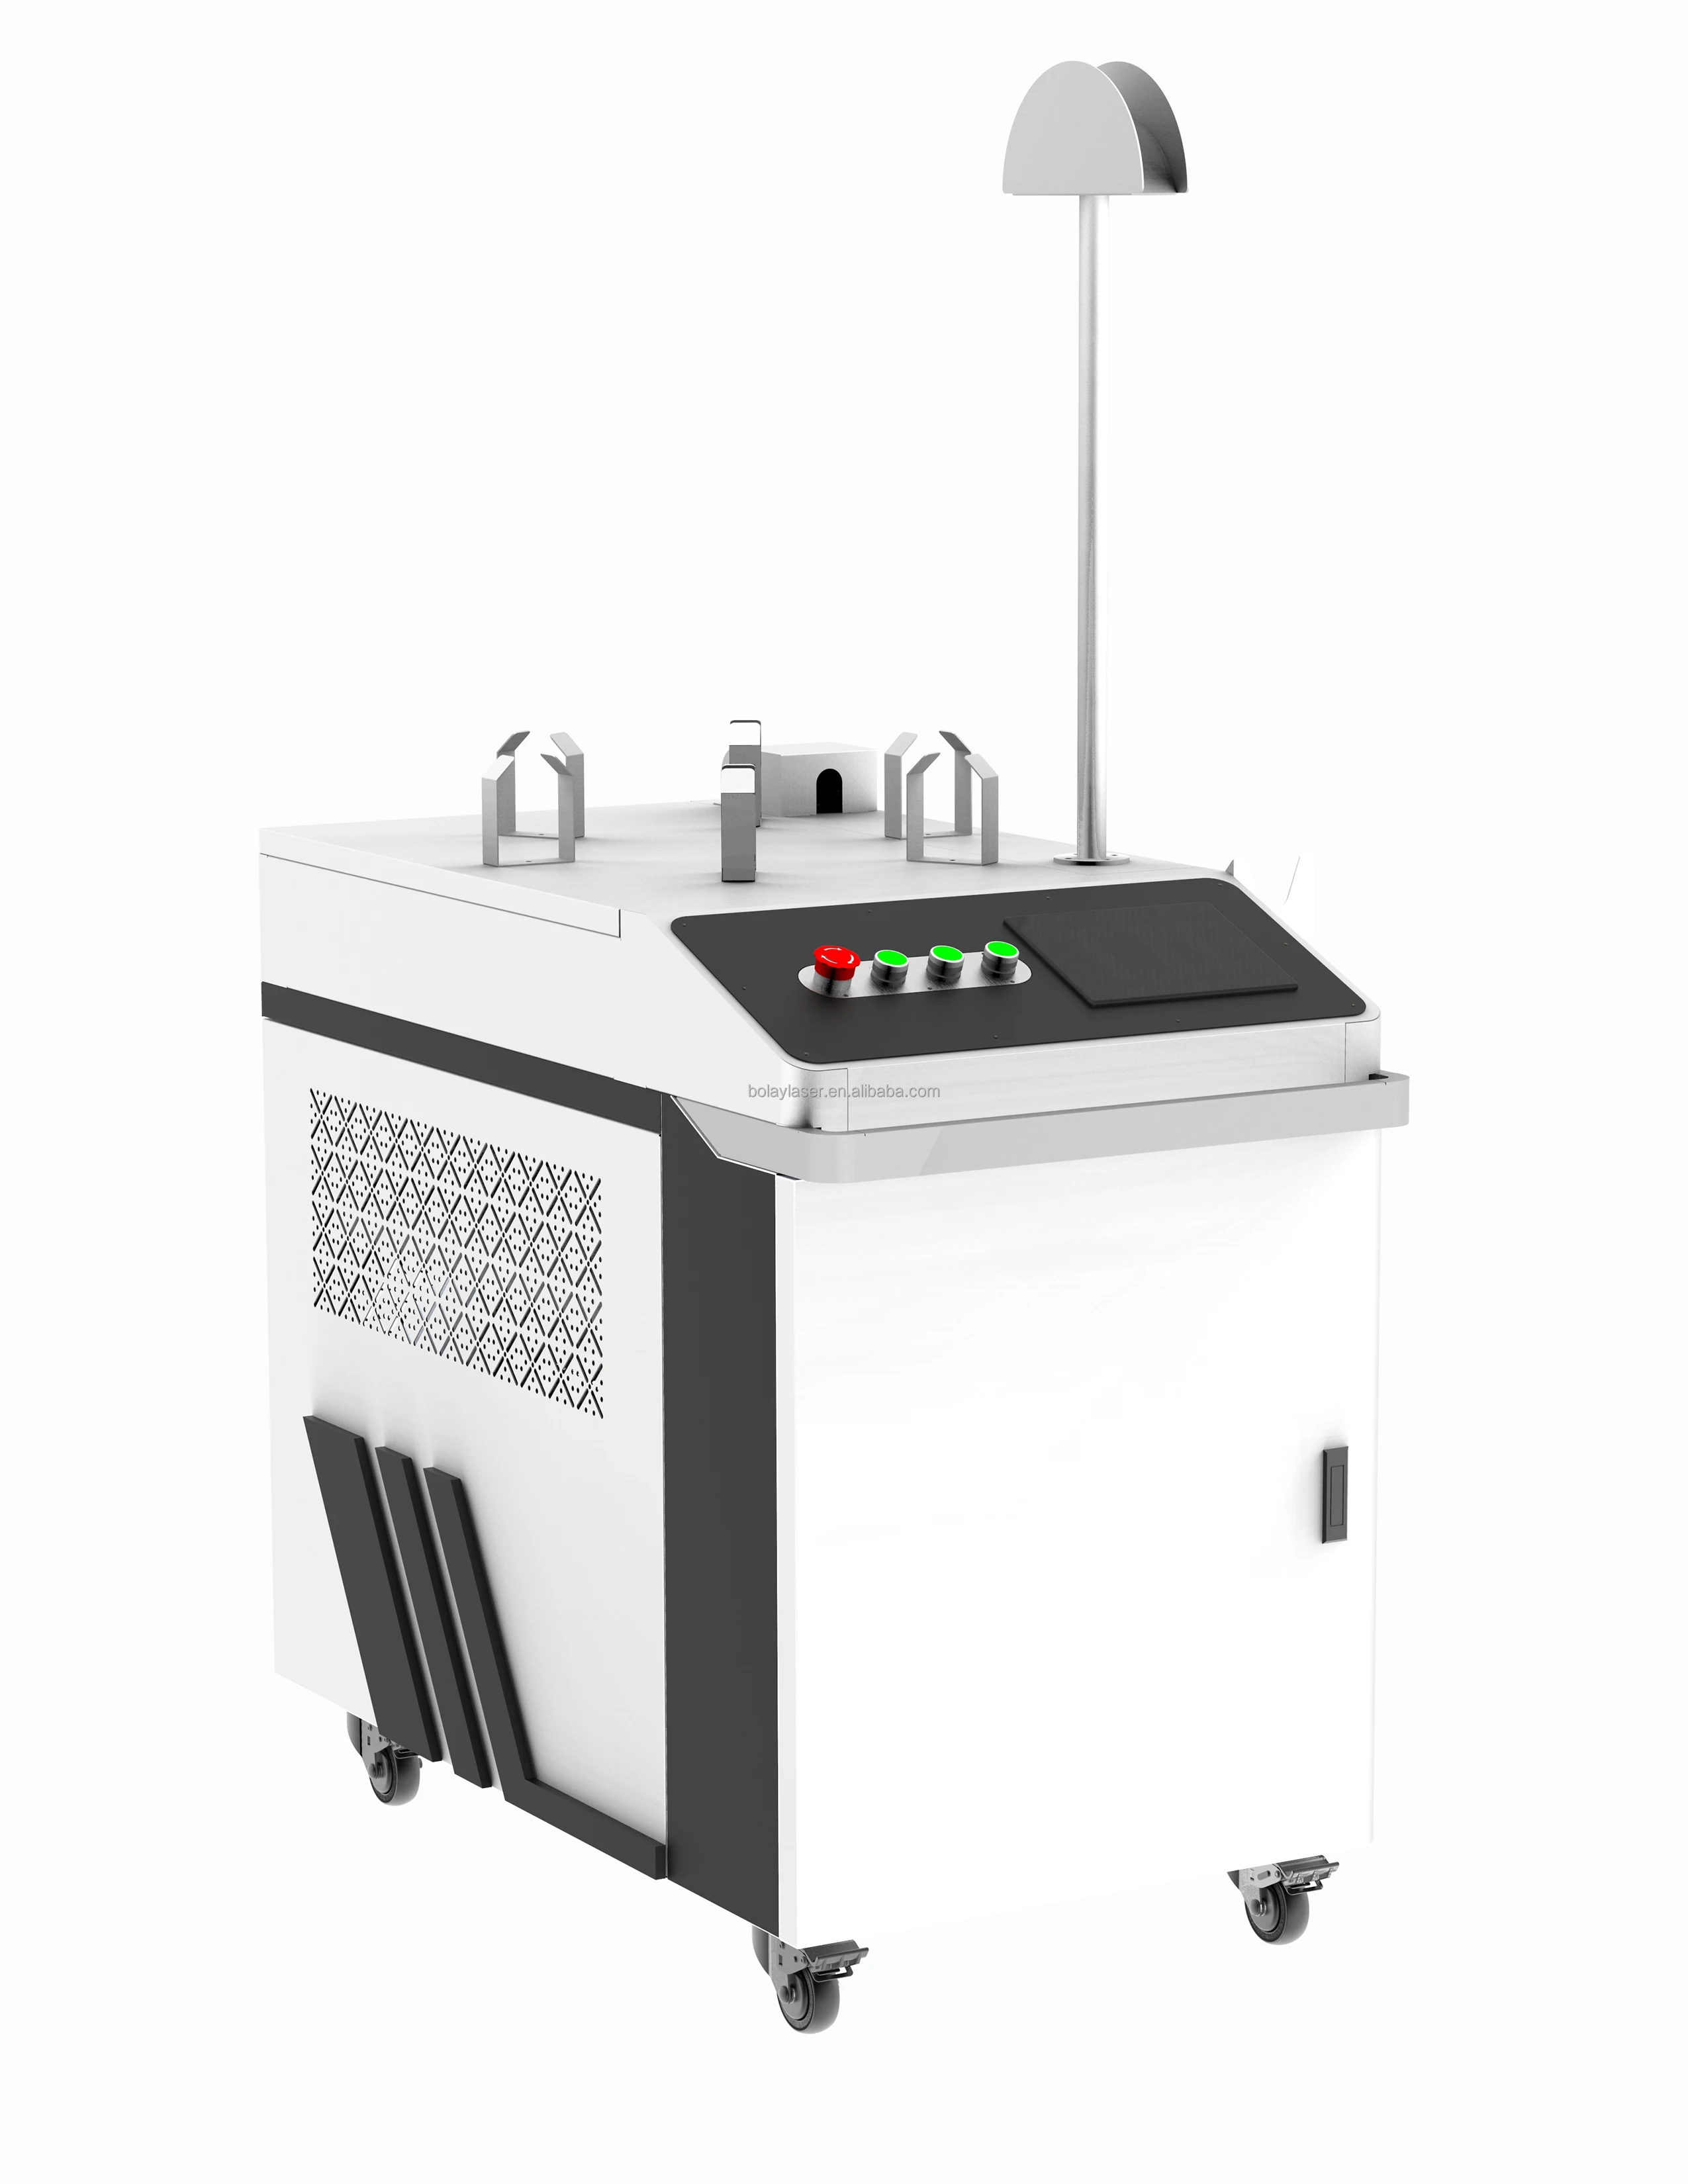 HOT selling laser welding machine professional metal welding machine 1500w 2000w easy to handle factory price (1600694362142)